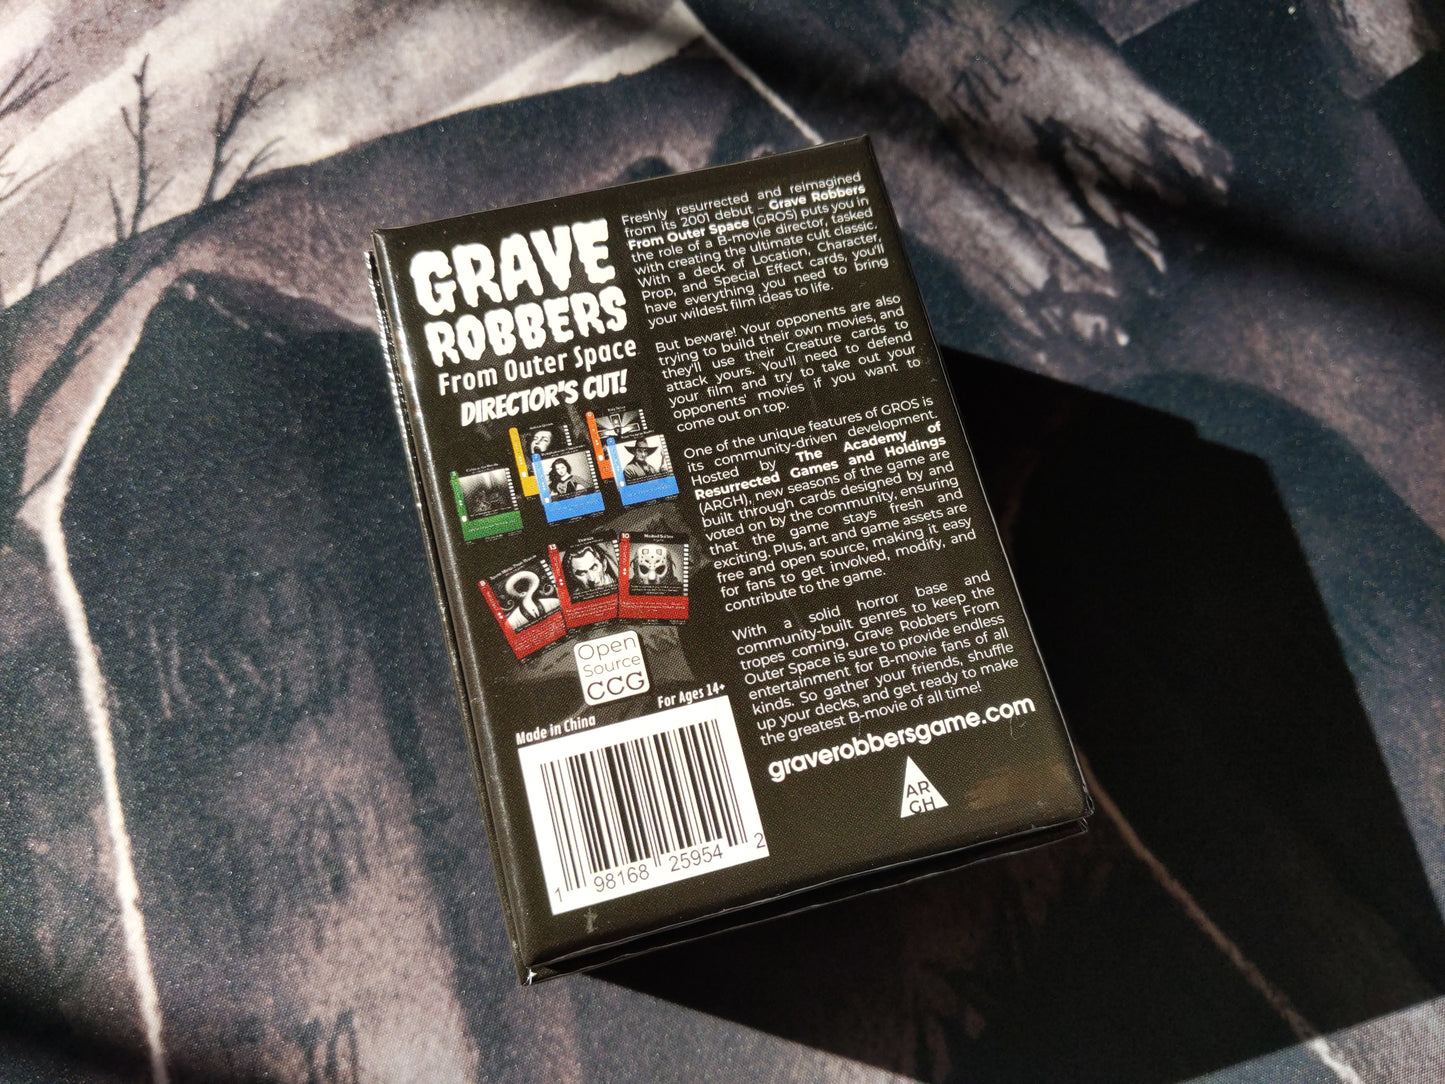 Grave Robbers From Outer Space: Director's Cut!